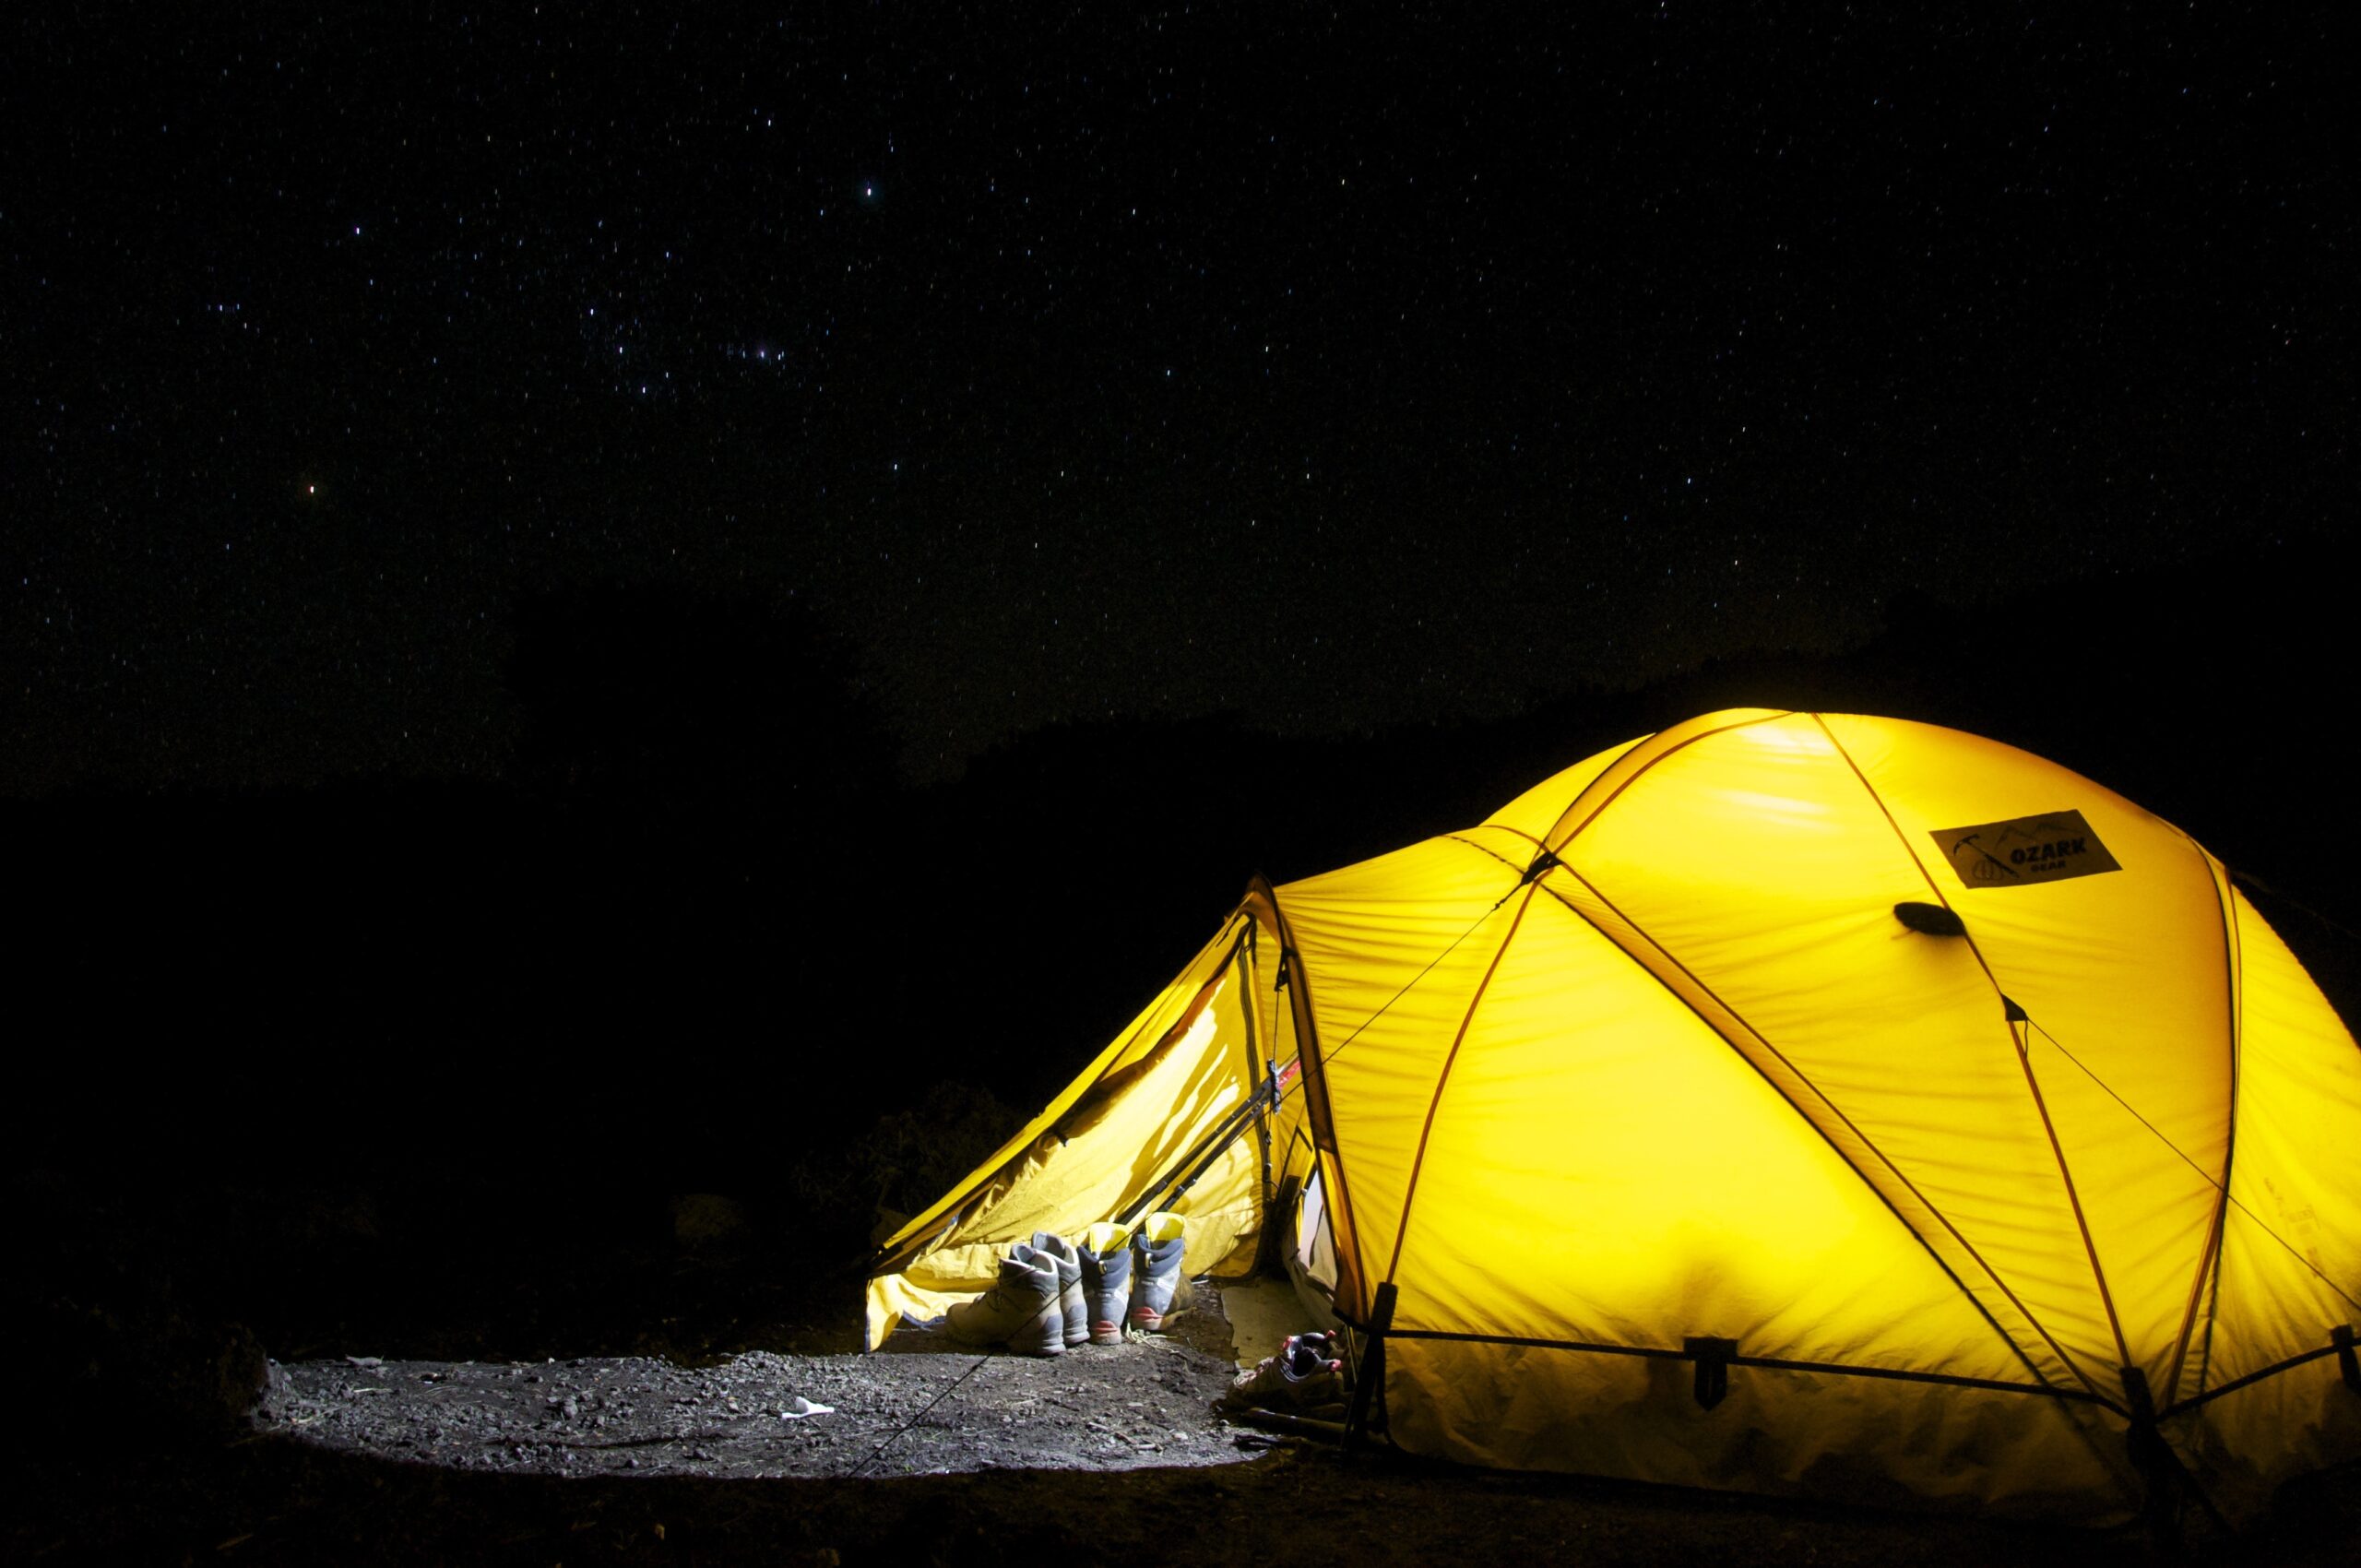 How Do I Make A Tent Warmer? 8 Top Tips